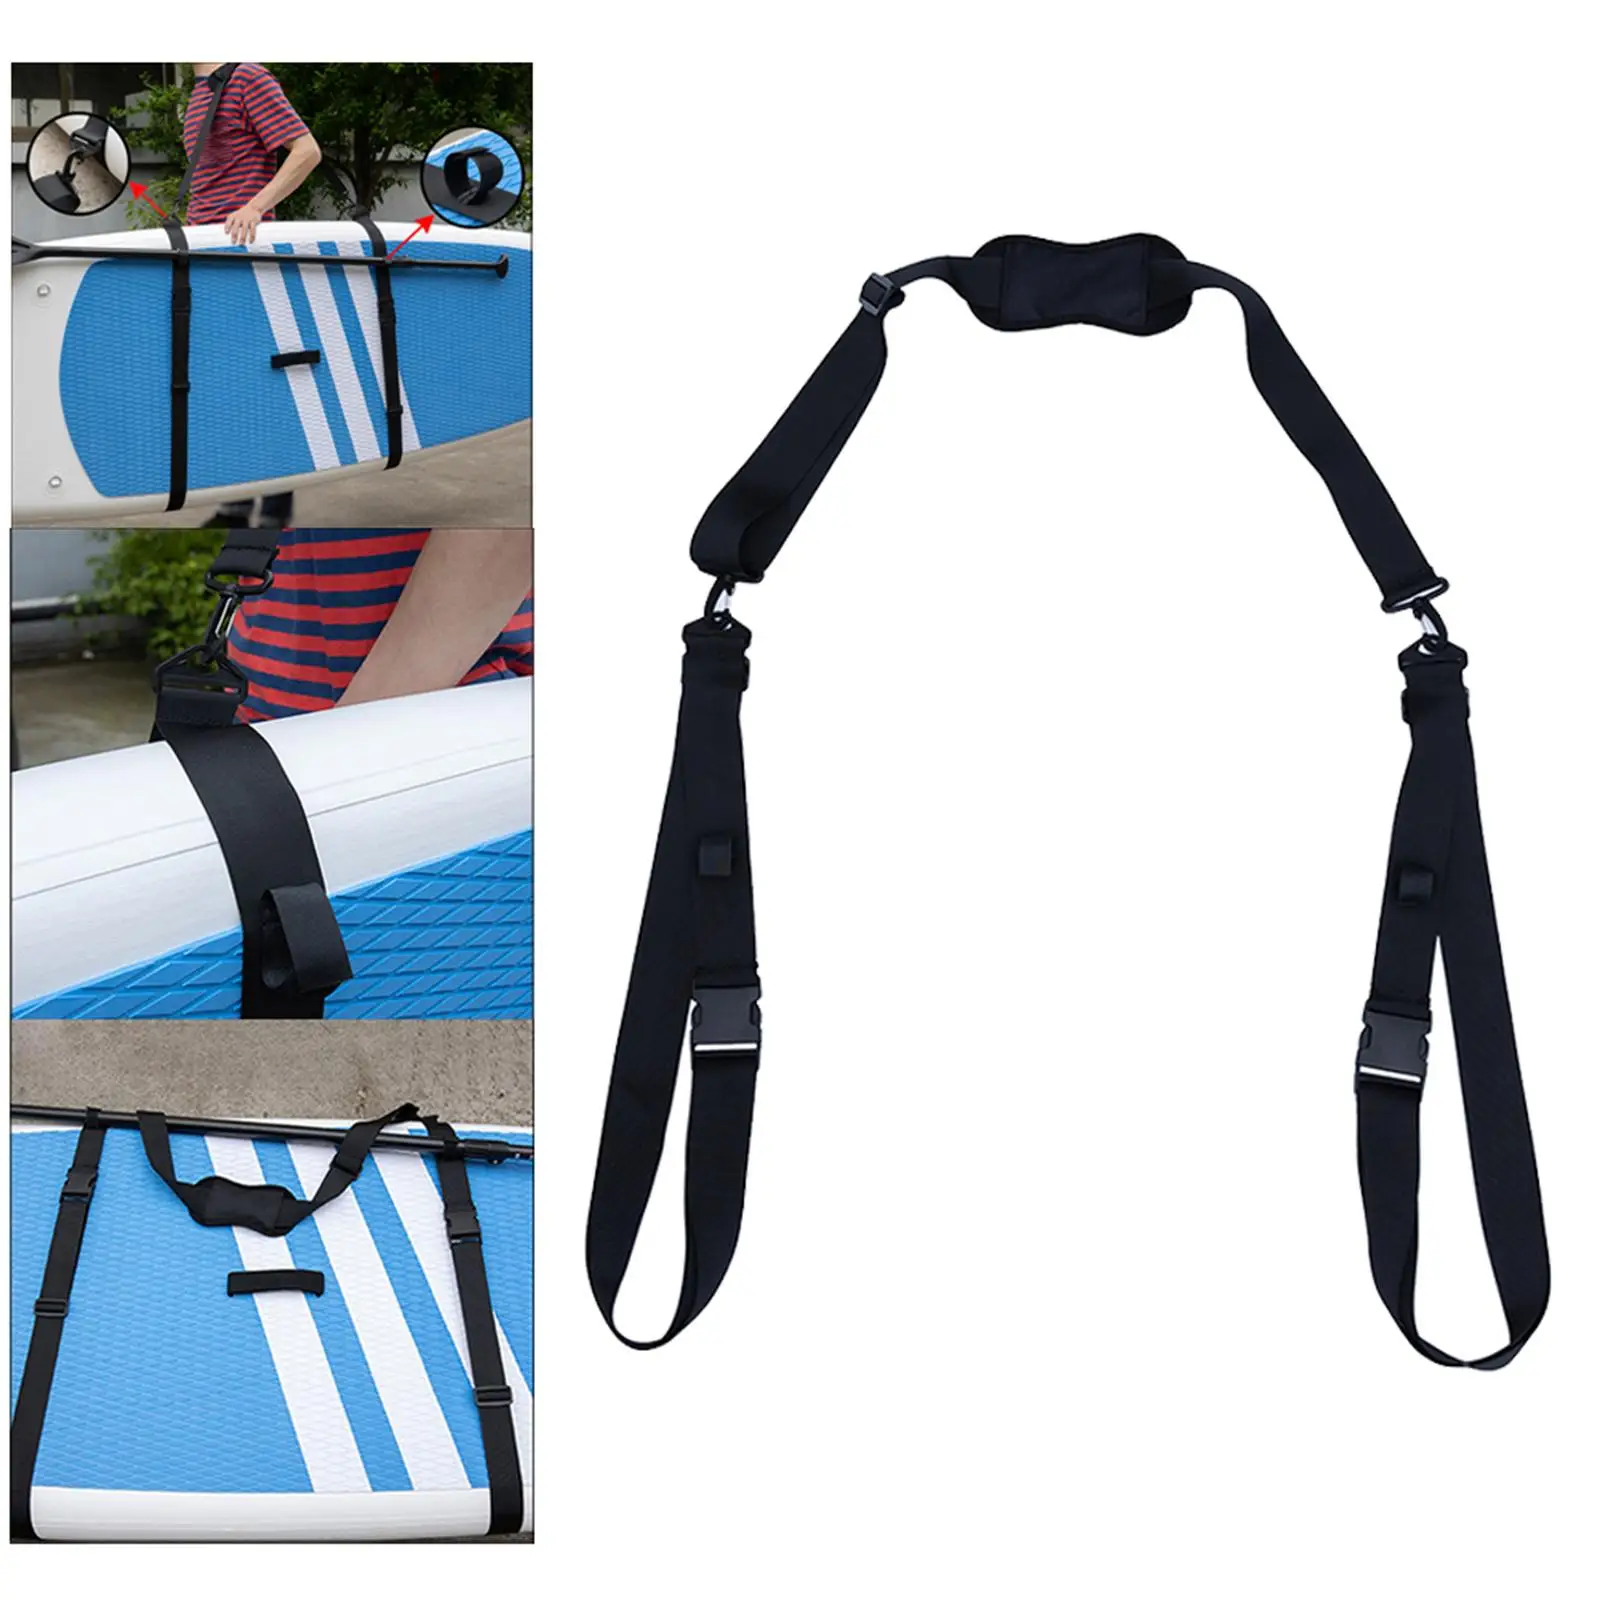 Paddleboard Carry Strap,  Board Carrier Storage  for Surfboards, Paddleboards and Kayaks, Adjustable Heavy-Duty Carrying Belt